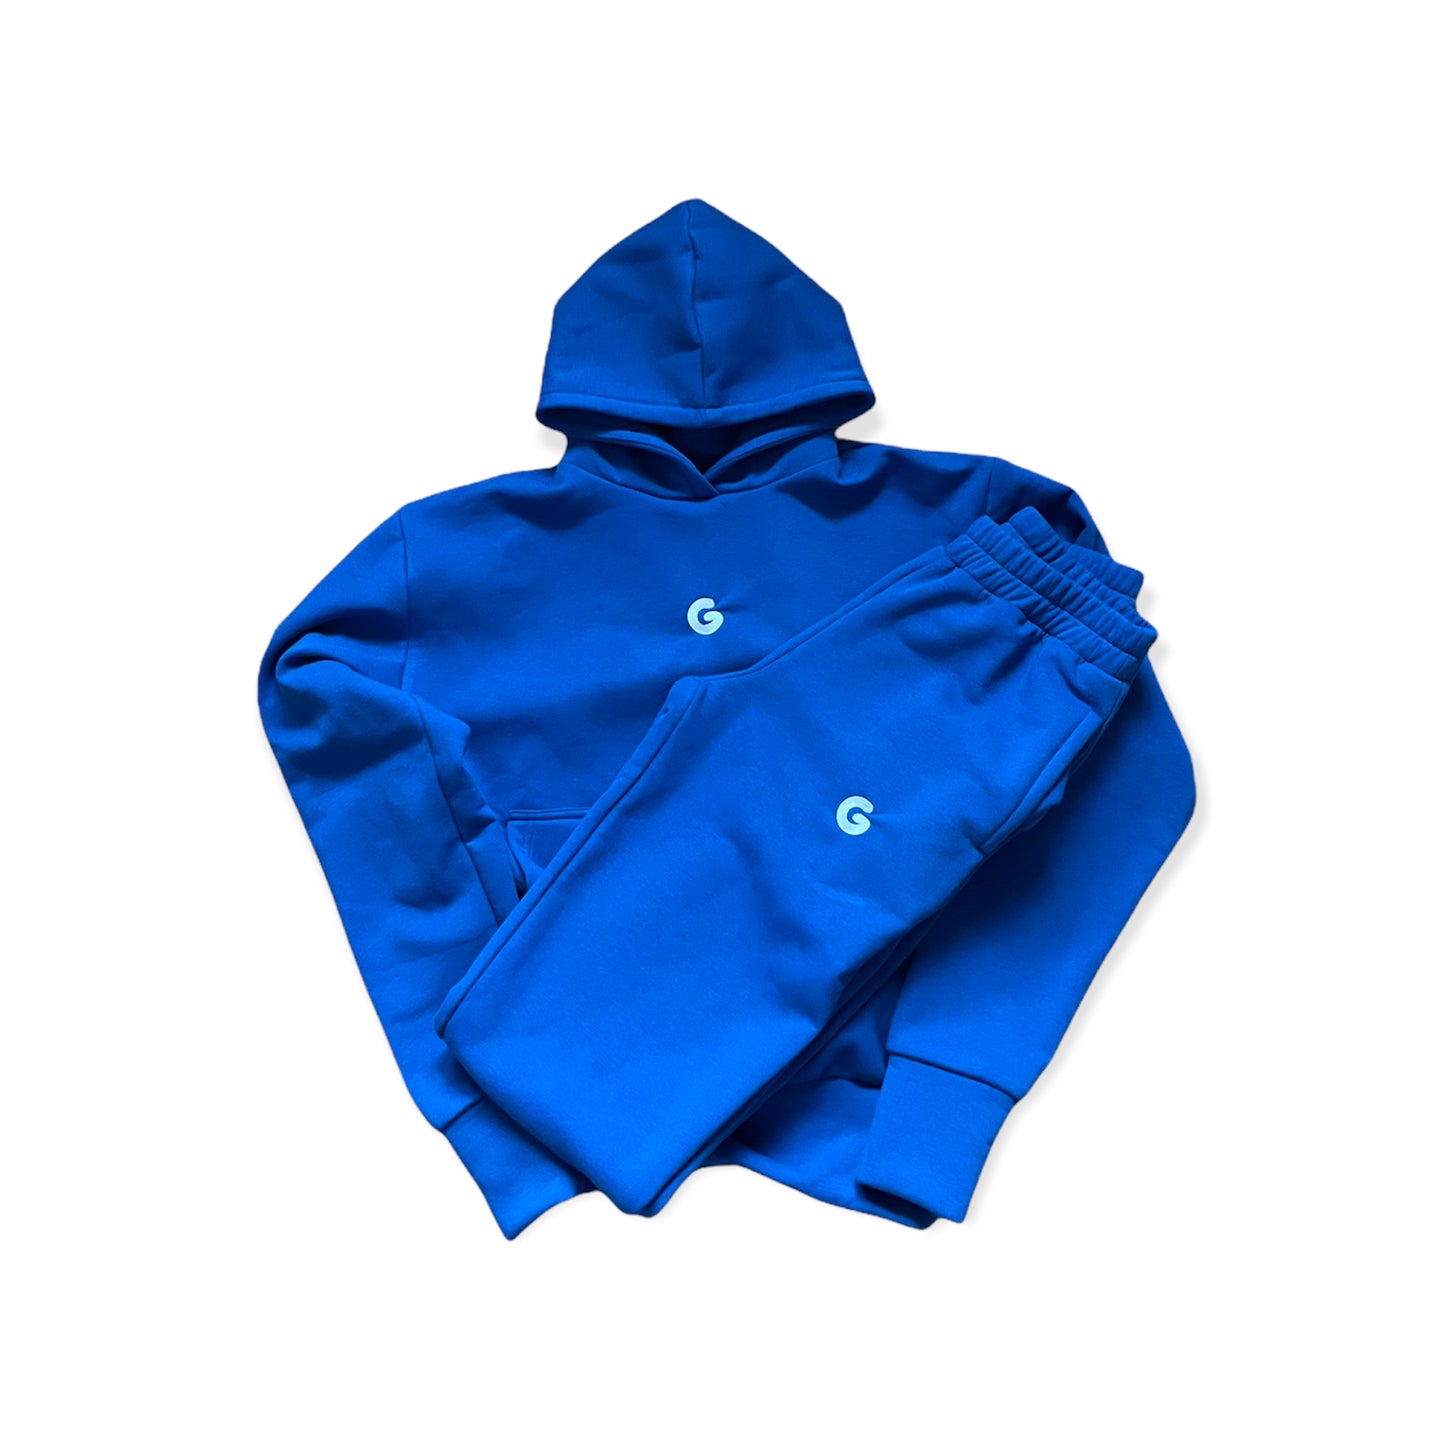 TheG Tracksuit // blue